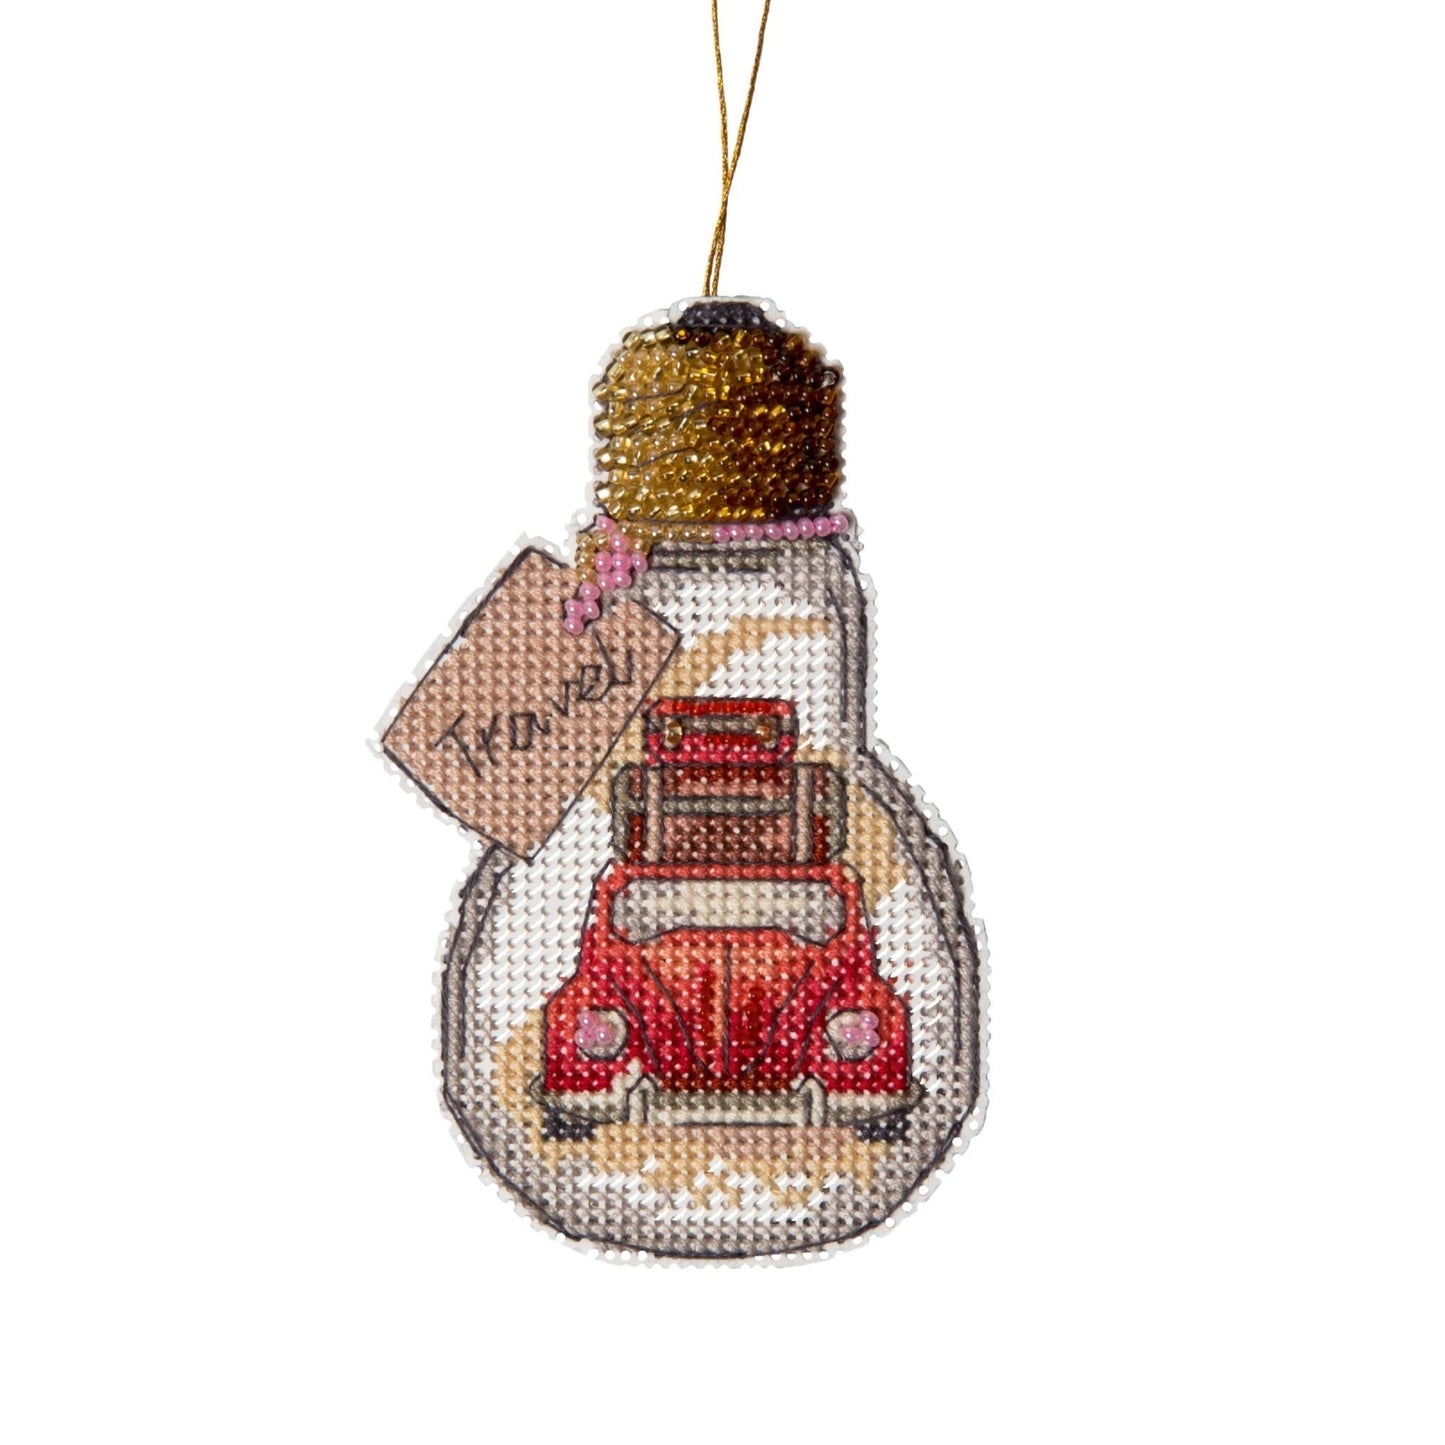 RED CAR "Travel series", Counted Cross-Stitch Kit, 14 count plastic canvas, size 6 x 11 cm, CRYSTAL ART (T-84)